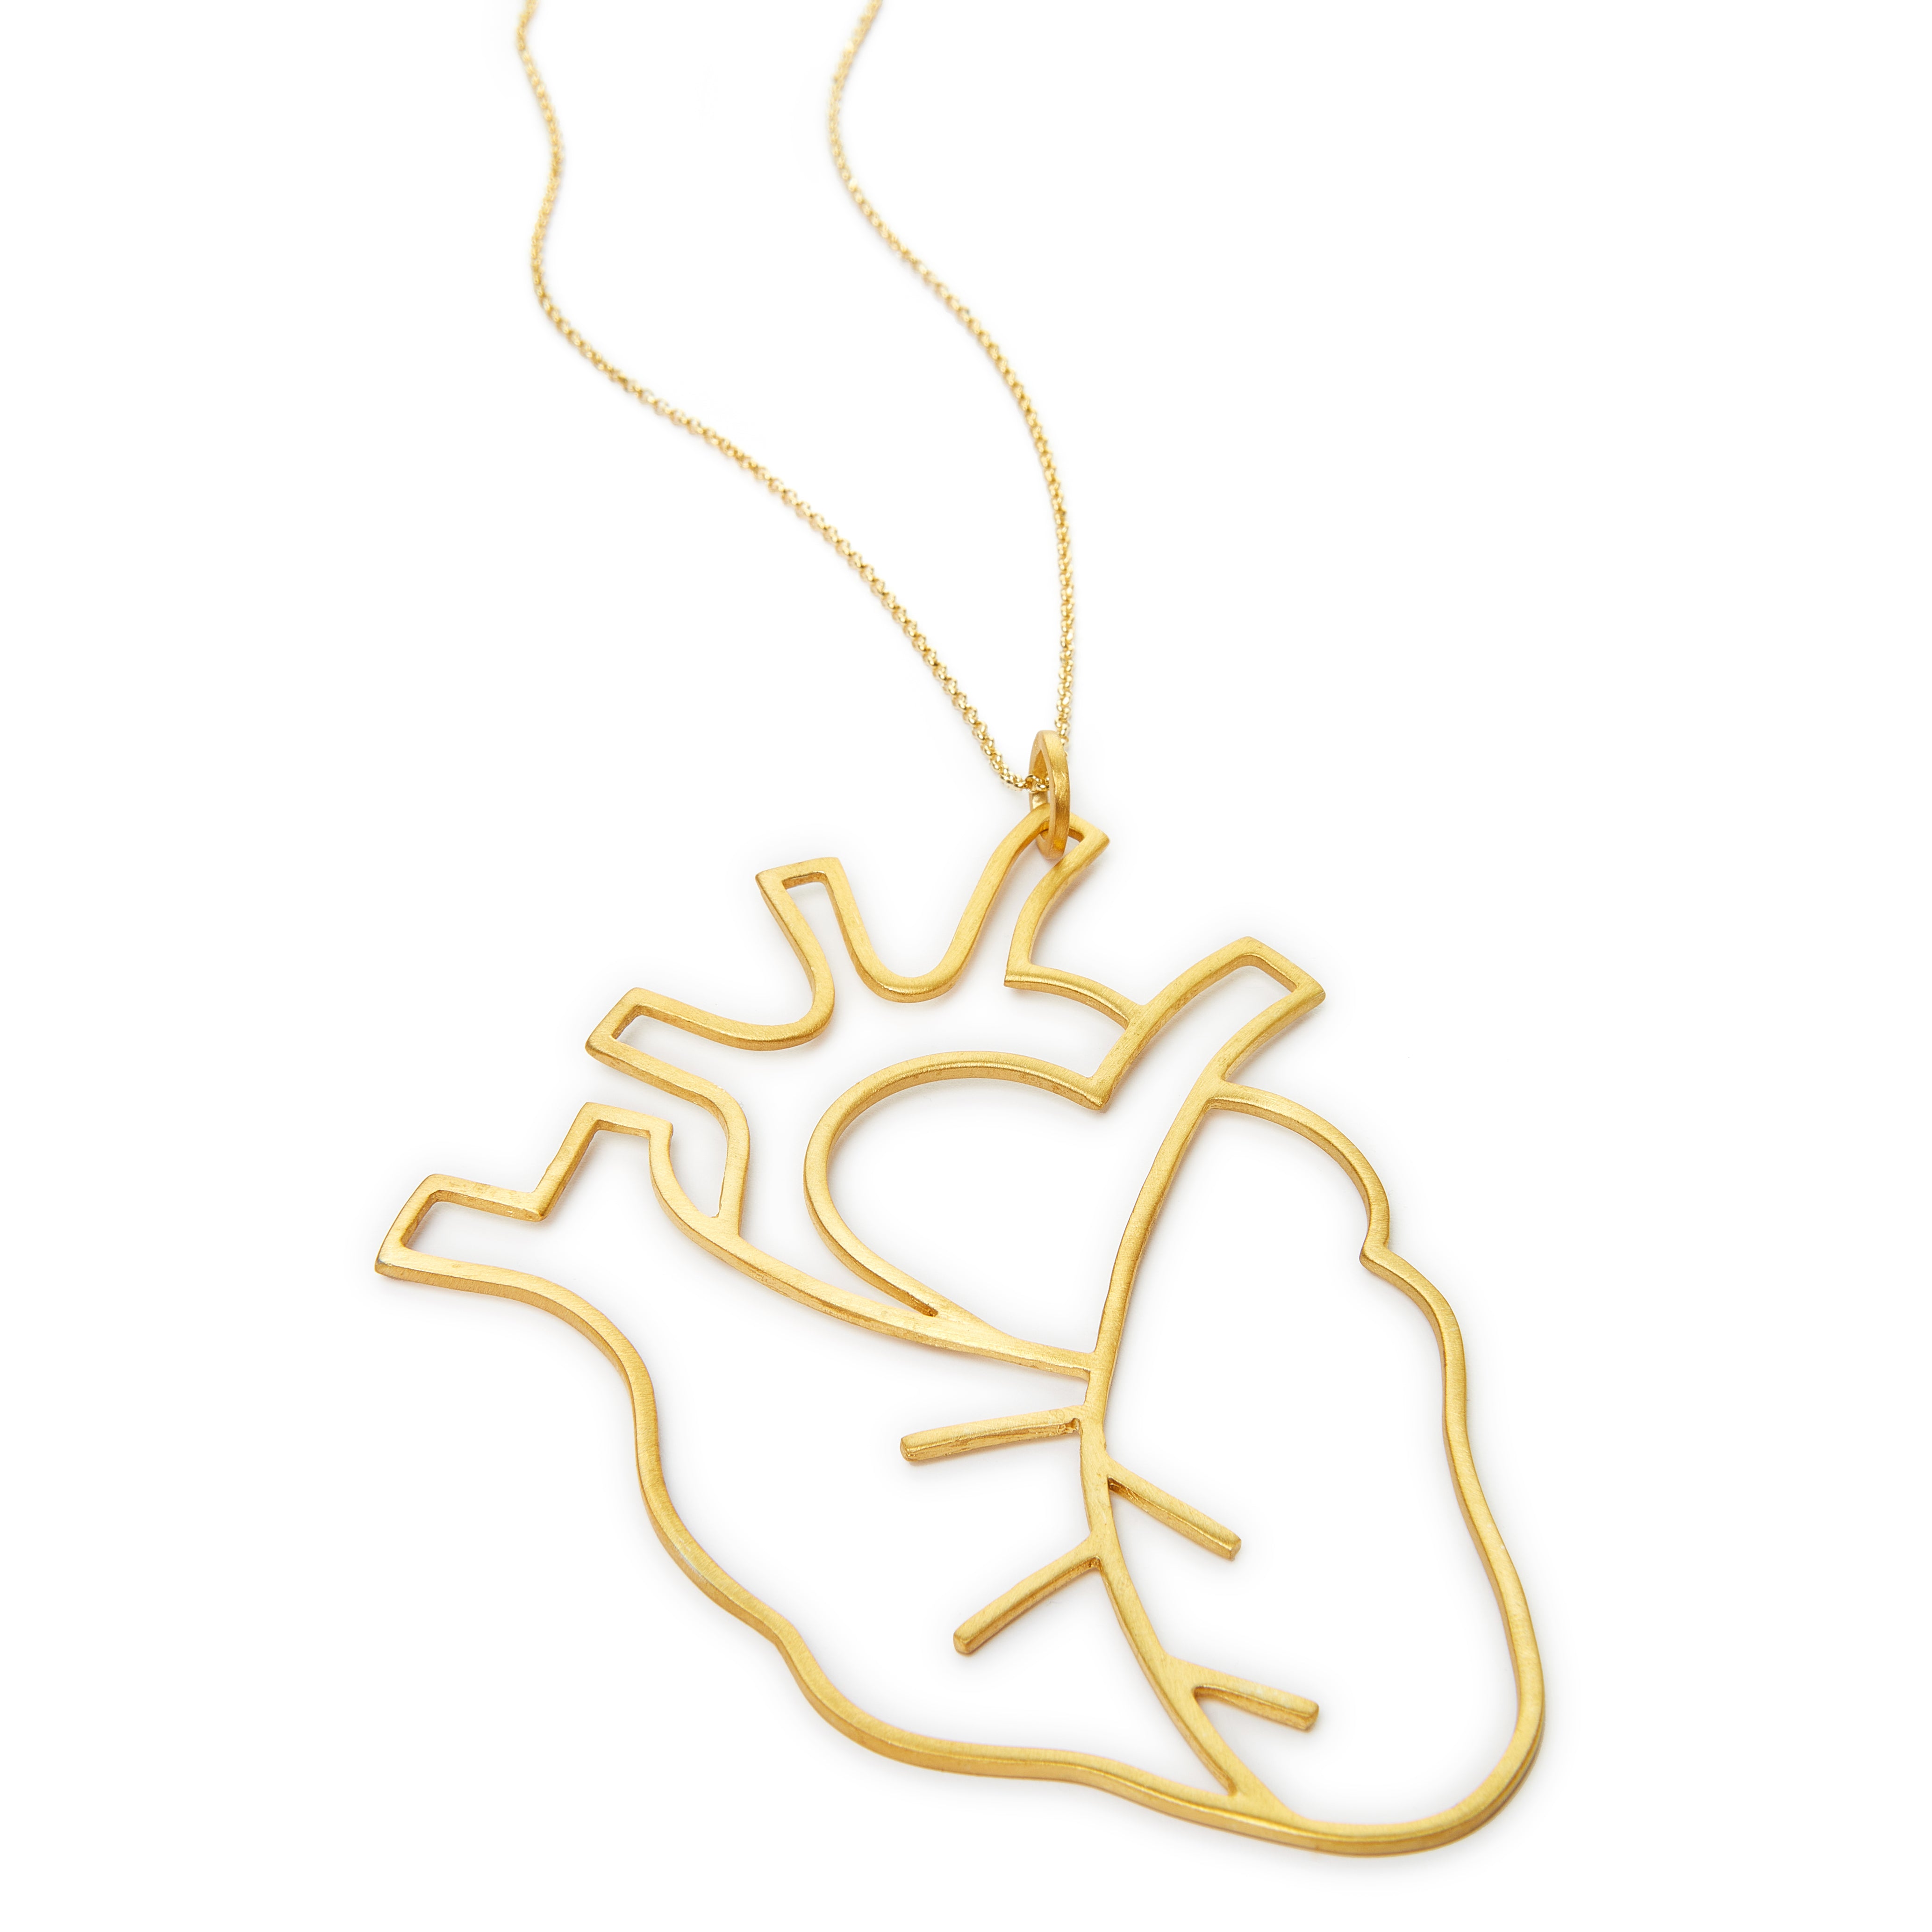 Human heart chain necklace